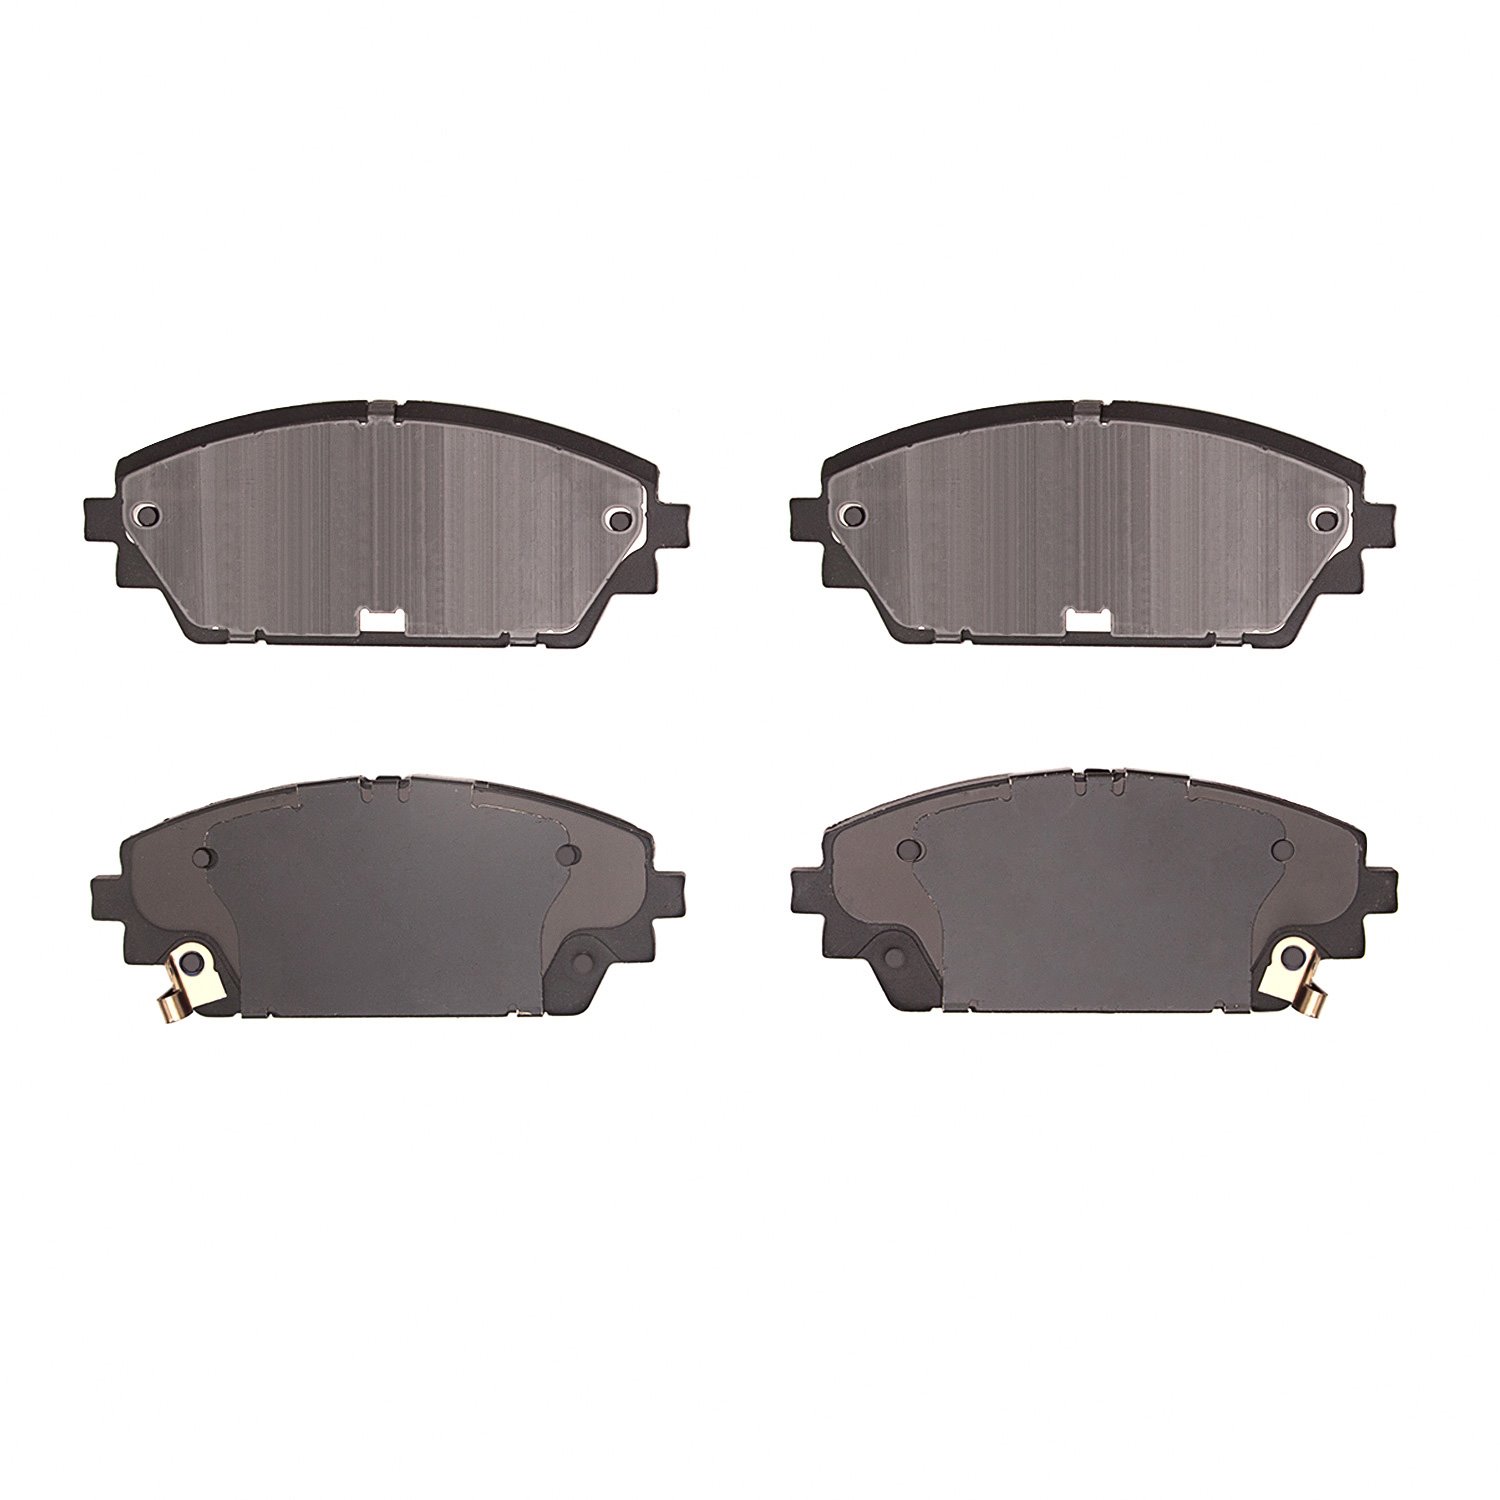 1551-2218-00 5000 Advanced Ceramic Brake Pads, Fits Select Ford/Lincoln/Mercury/Mazda, Position: Front